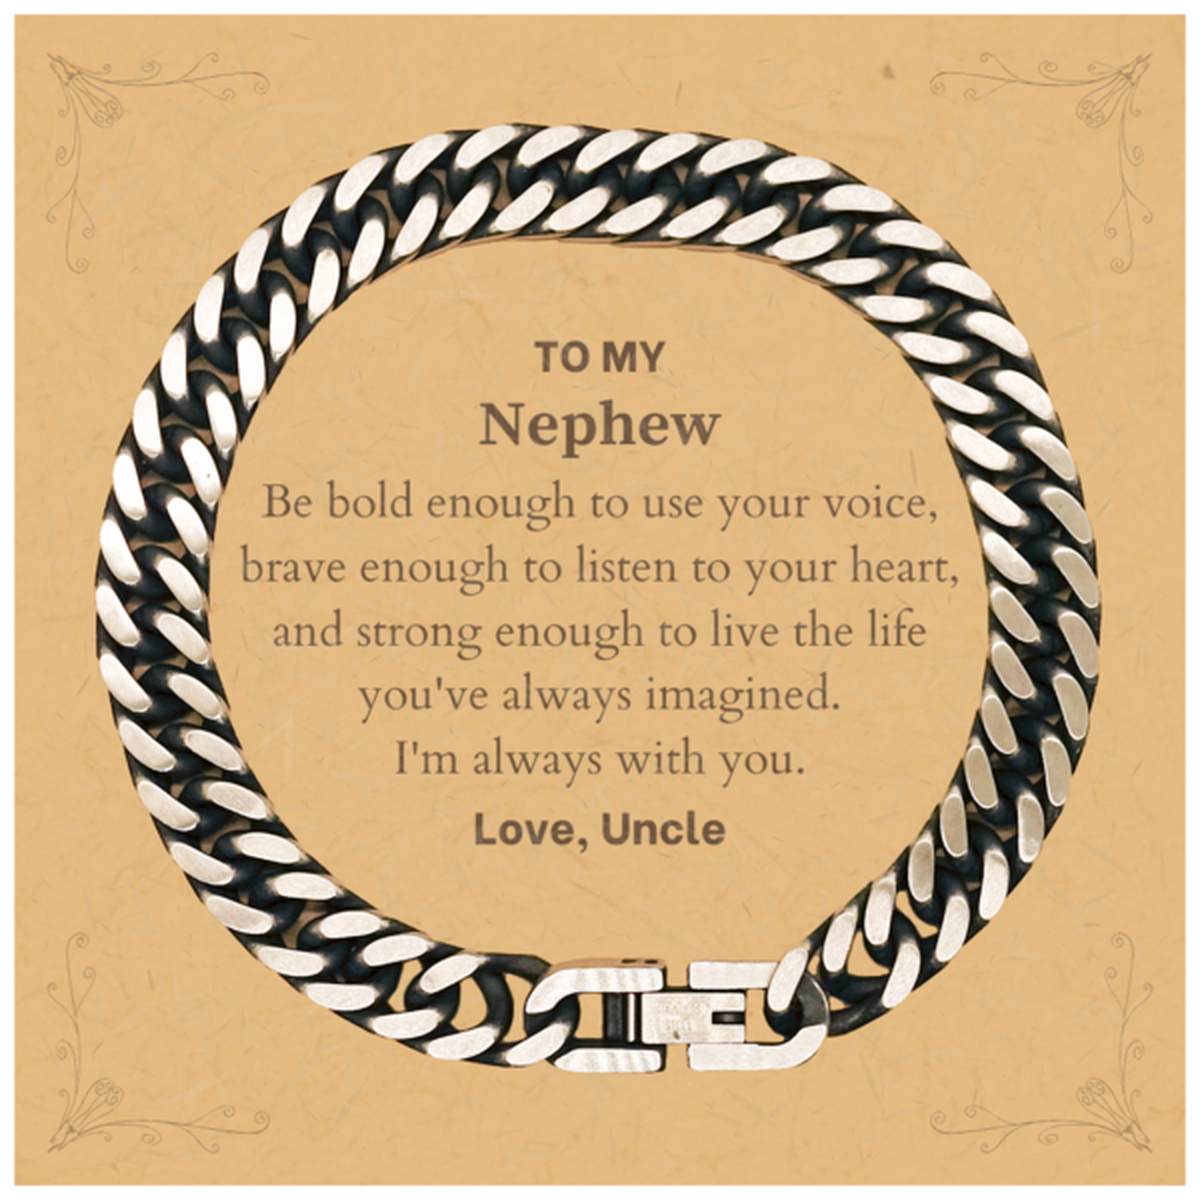 Keepsake Nephew Cuban Link Chain Bracelet Gift Idea Graduation Christmas Birthday Nephew from Uncle, Nephew Be bold enough to use your voice, brave enough to listen to your heart. Love, Uncle